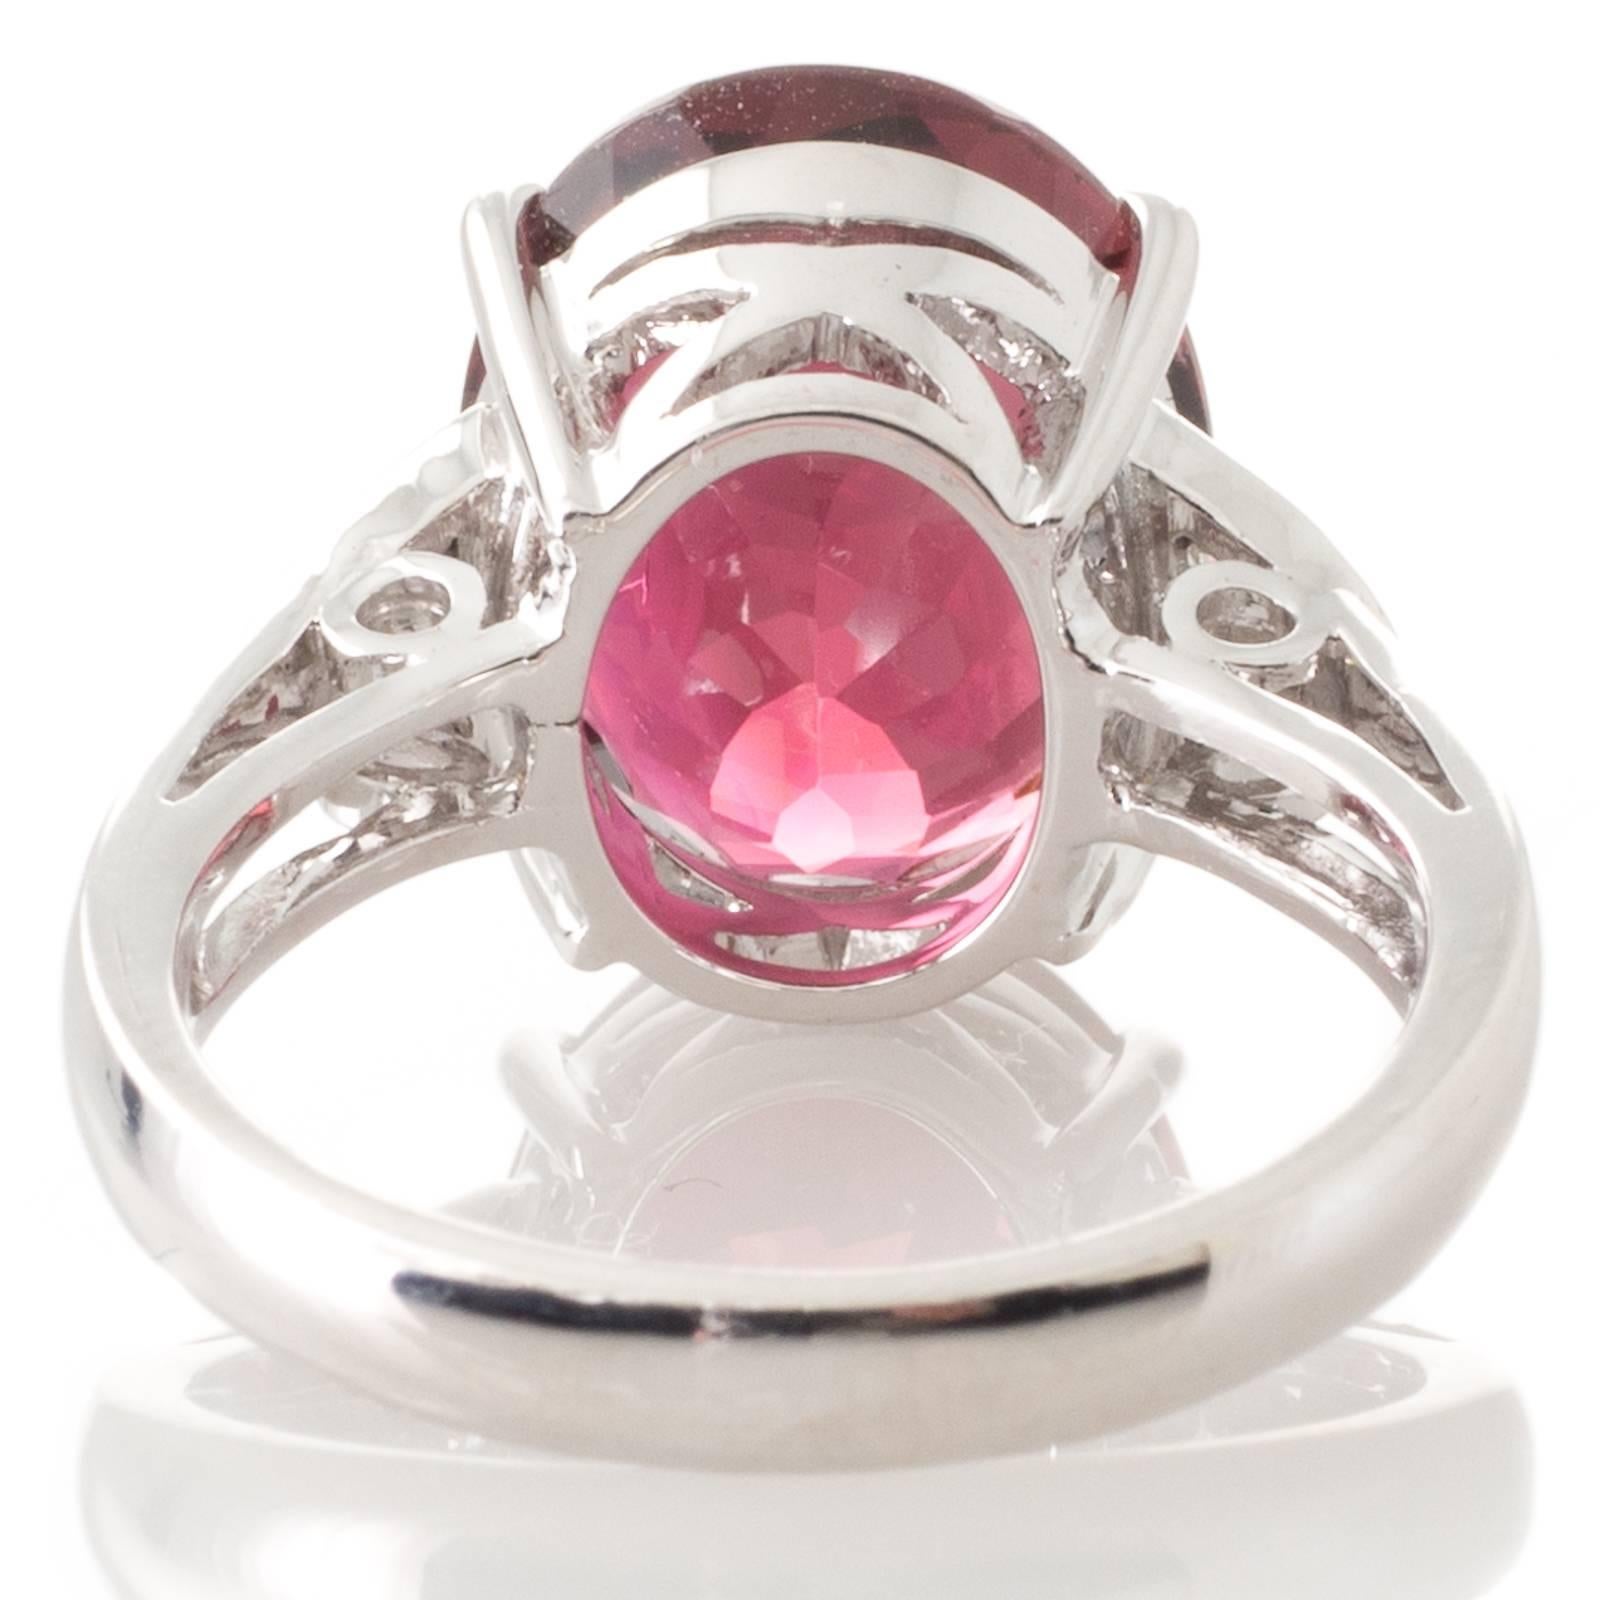 An 18ct white gold ring four claw set to the centre with a 7.03ct oval faceted pink tourmaline above a lattice pierced gallery to upswept shoulders each with a triangular top which is grain set with three diamonds all to a plain polished shank.